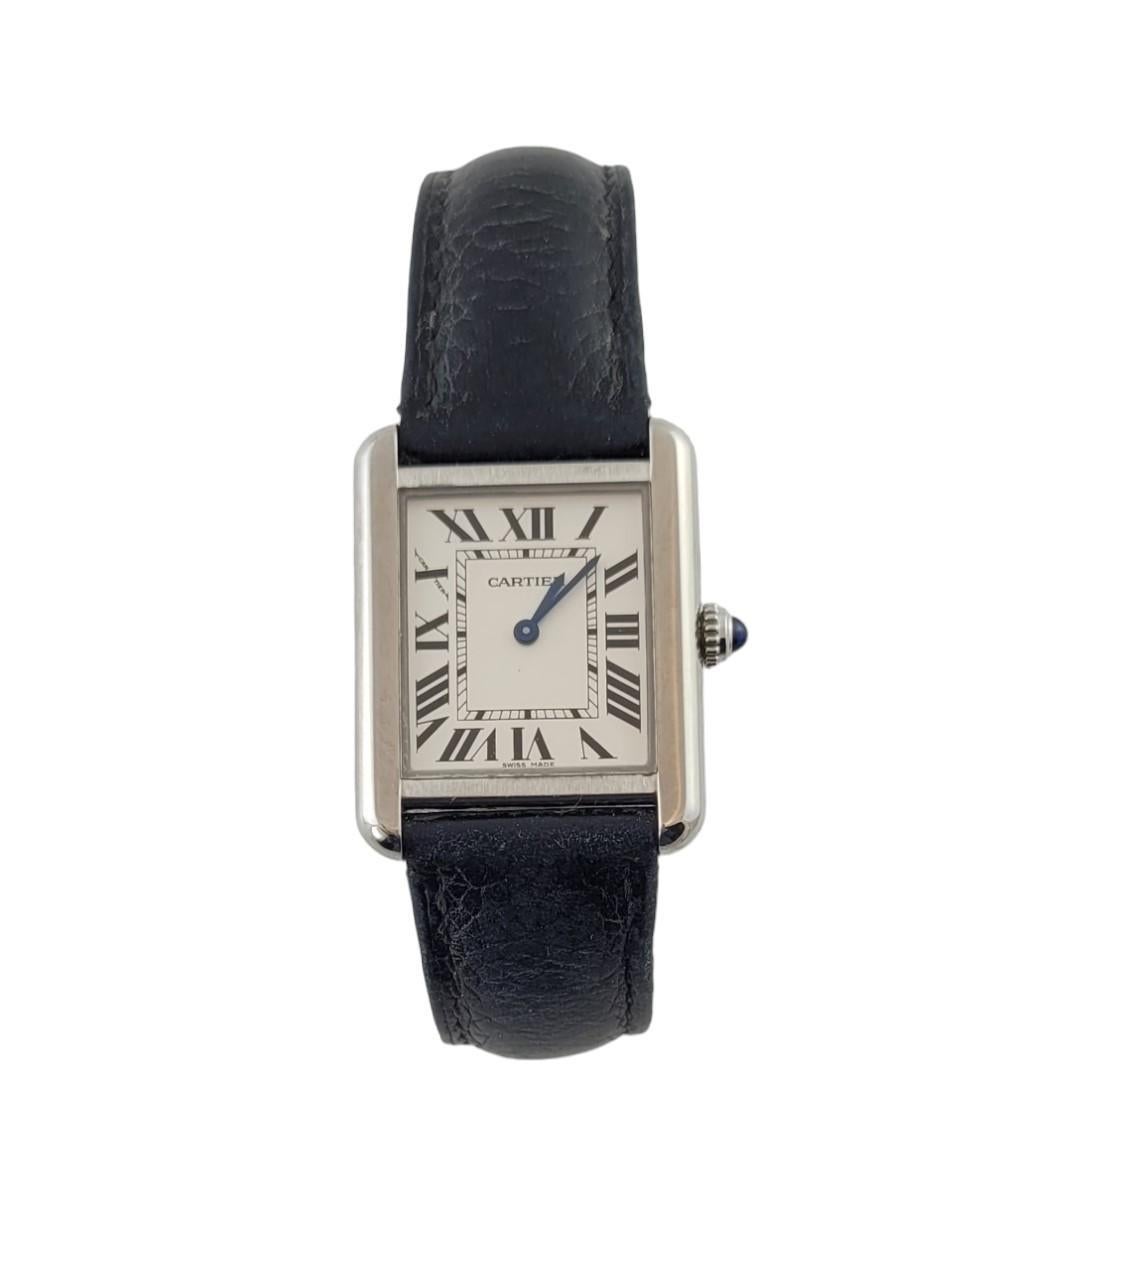 2017 Cartier Ladies Tank Solo Watch

Model: WSTA0030
Serial: 3170544614XX

Stainless steel case size: 24mm x 30mm

Black leather Cartier band with stainless steel clasp - leather strap shows wear as in pictures.

Fits up to 6 3/4